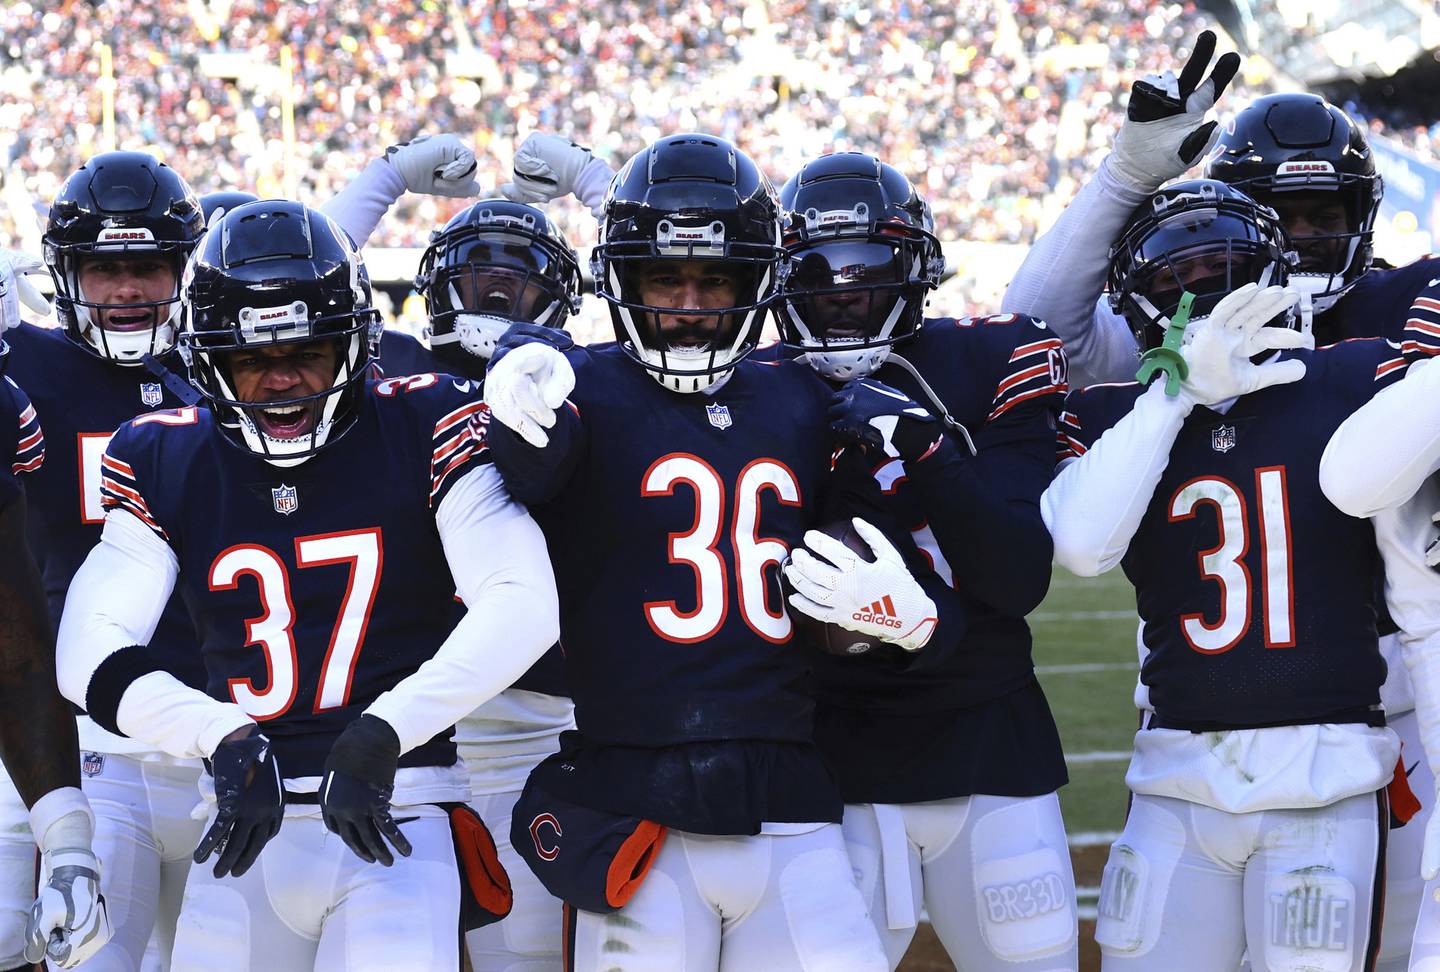 Bears safety DeAndre Houston-Carson celebrates with his teammates after his second-quarter interception against the Eagles at Soldier Field on Dec. 18, 2022.